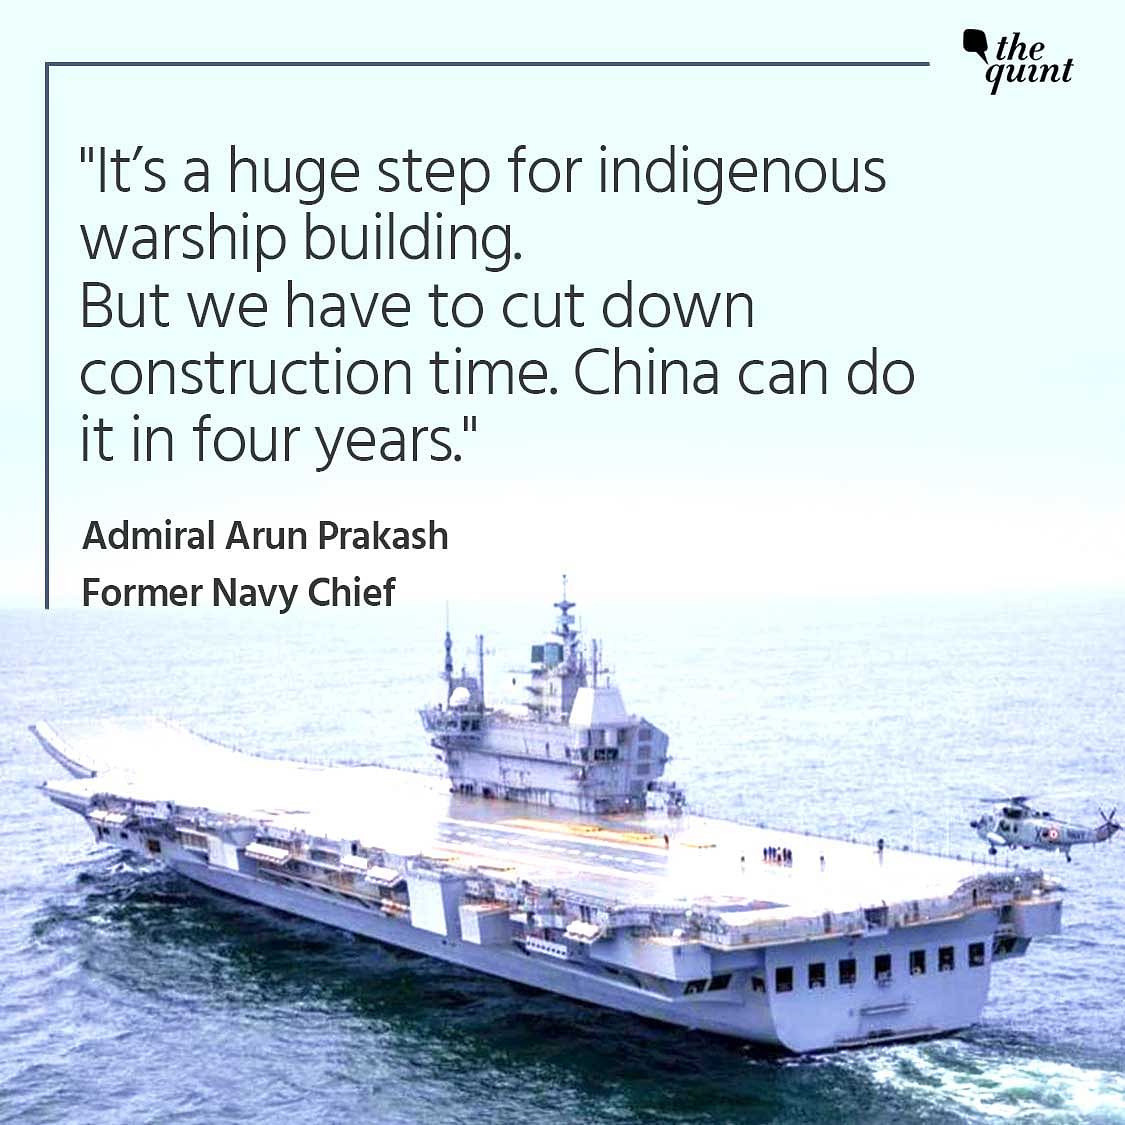 Named after India's first aircraft carrier and Indian Navy's crown jewel from 1961-1997, 'Vikrant' is India's pride.